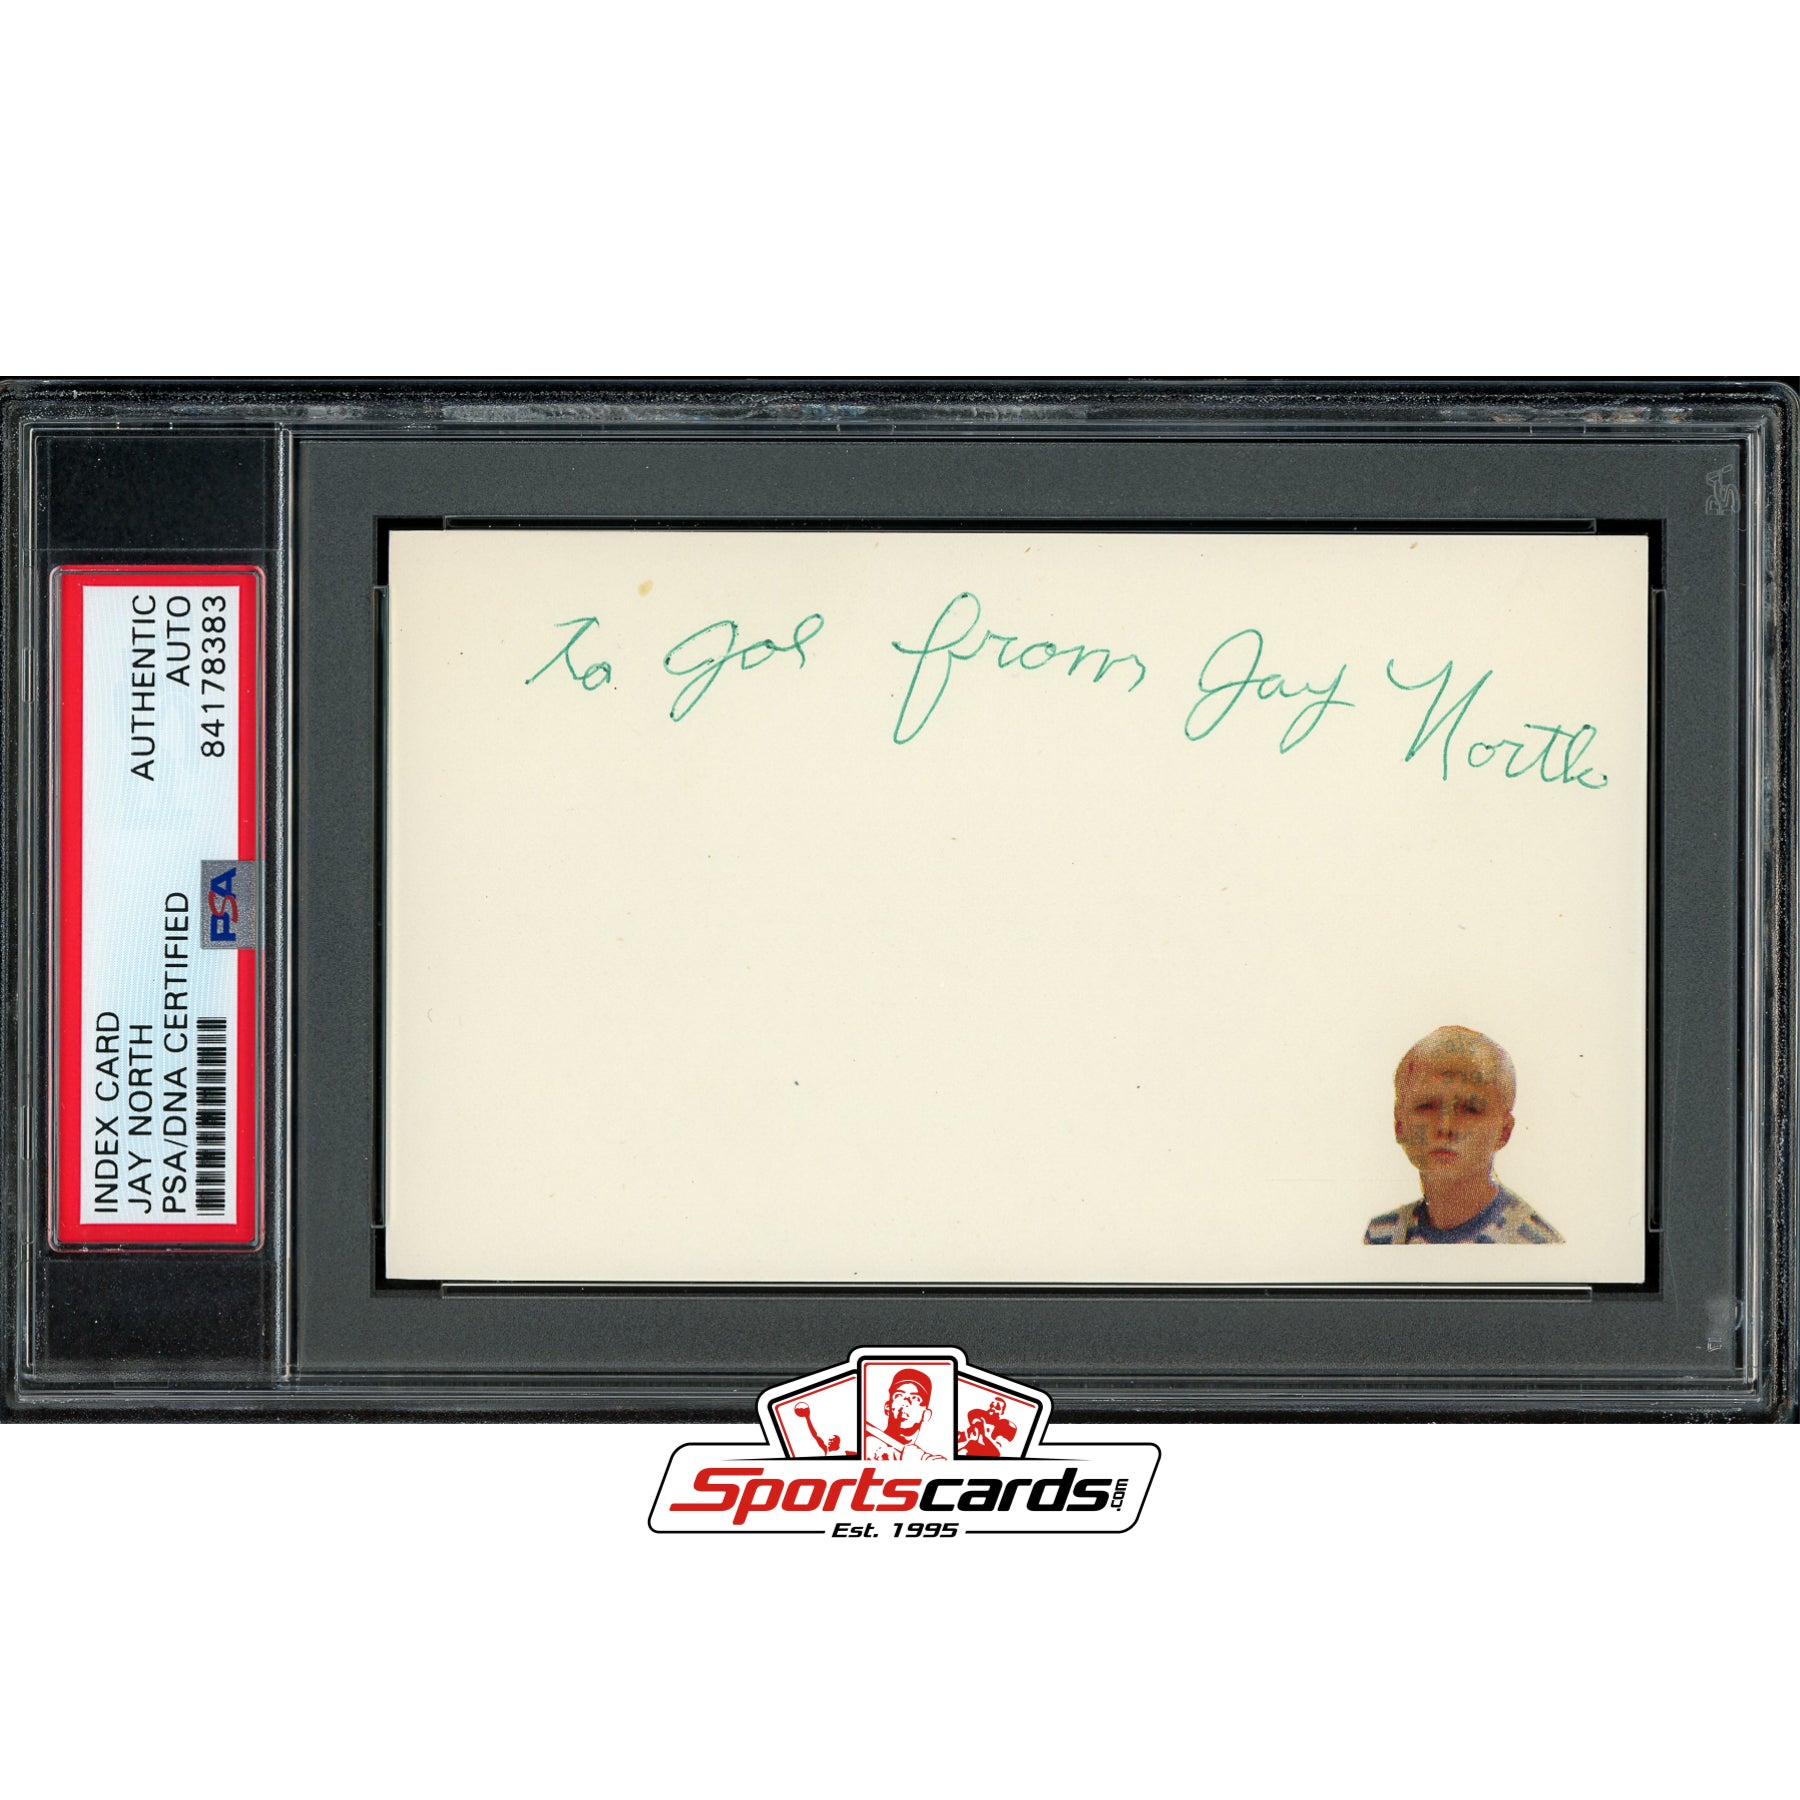 Jay North Signed Auto 3x5 Index Card PSA/DNA Actor Dennis the Menace